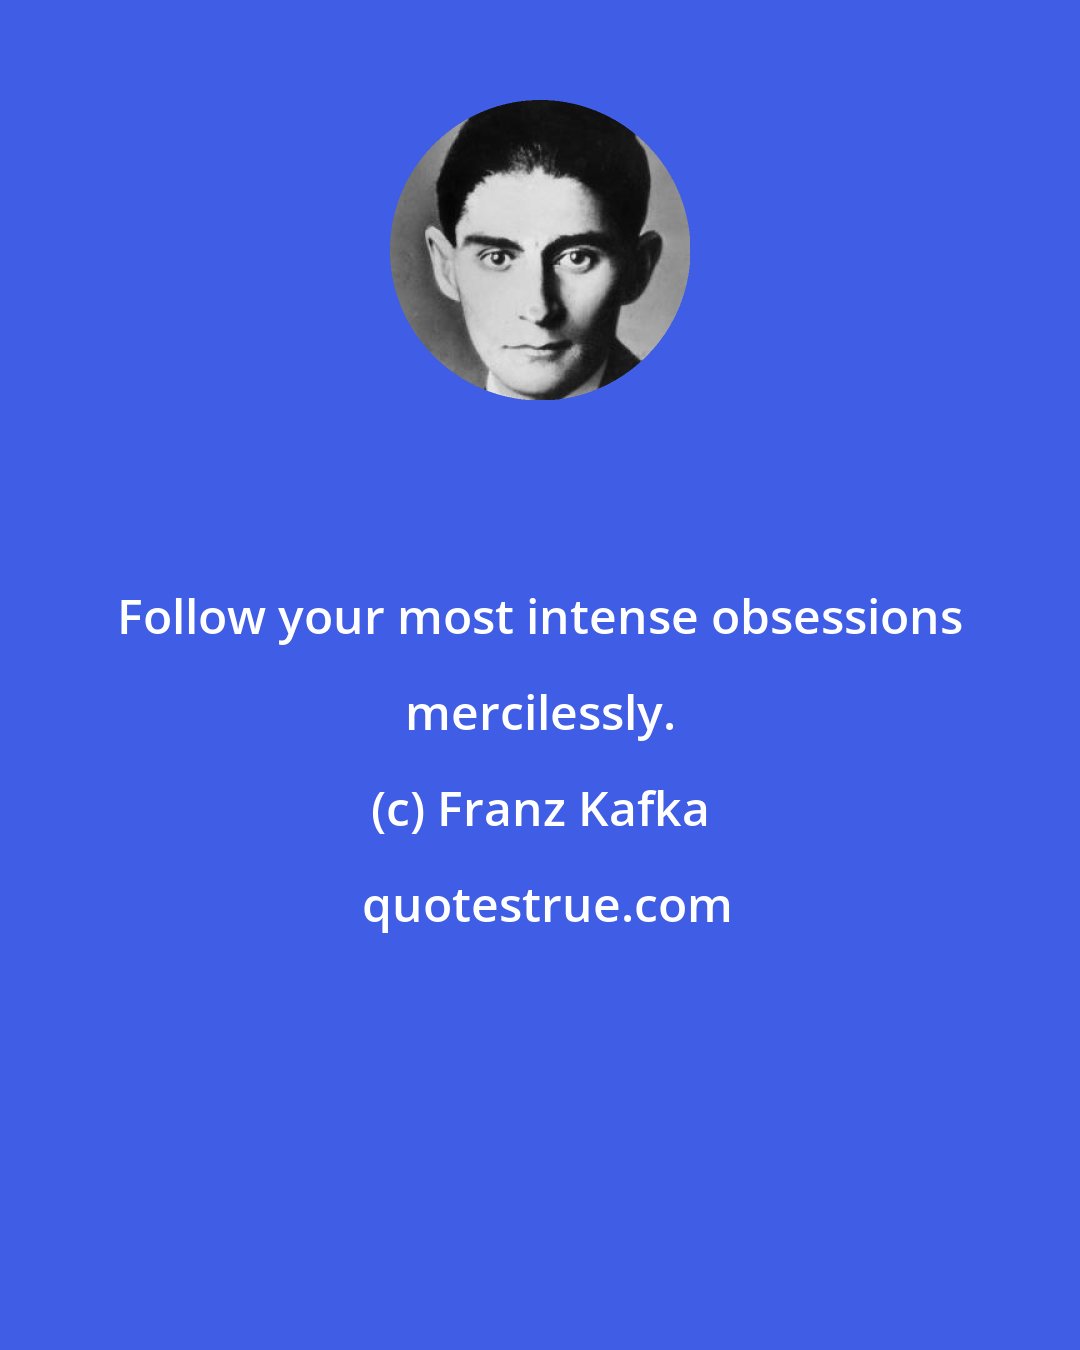 Franz Kafka: Follow your most intense obsessions mercilessly.